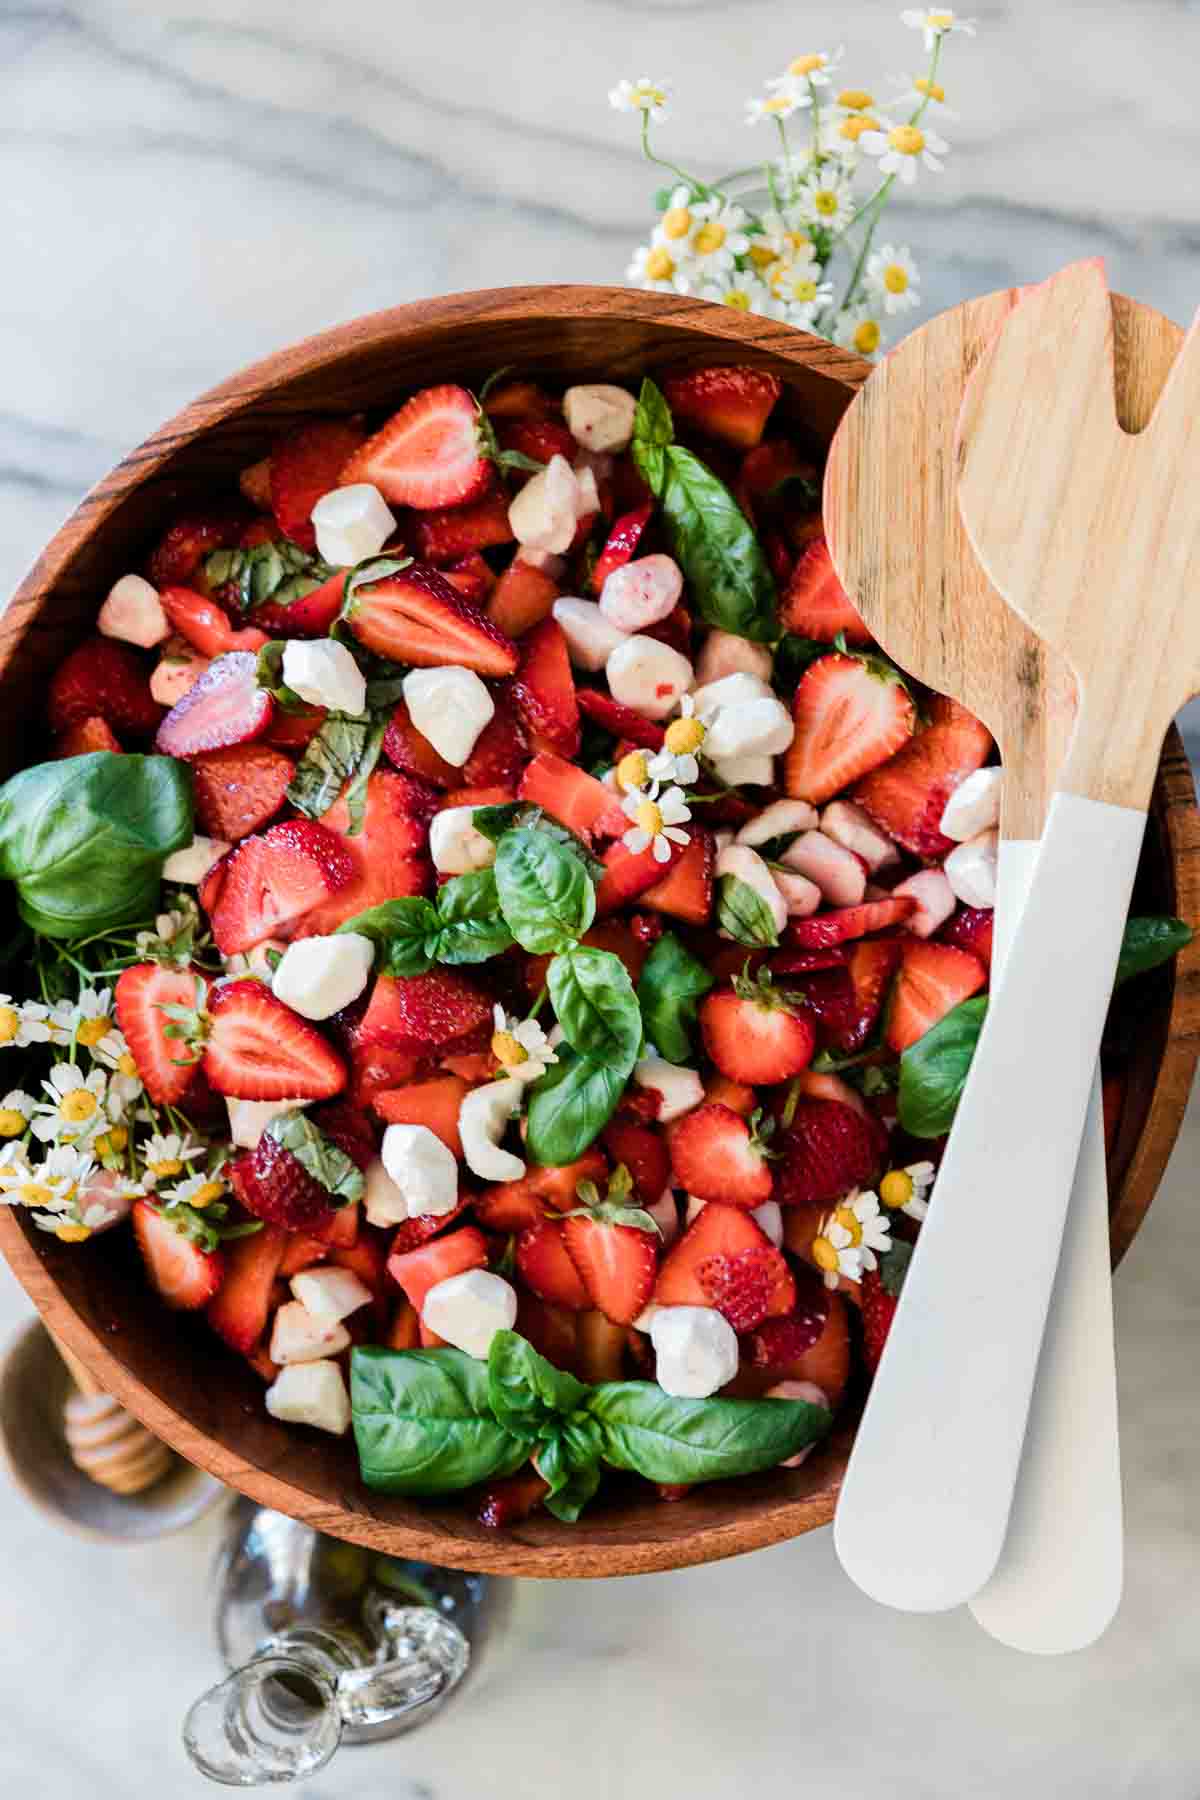 Strawberry caprese salad in a large wooden bowl. There are white salad servers to the side.